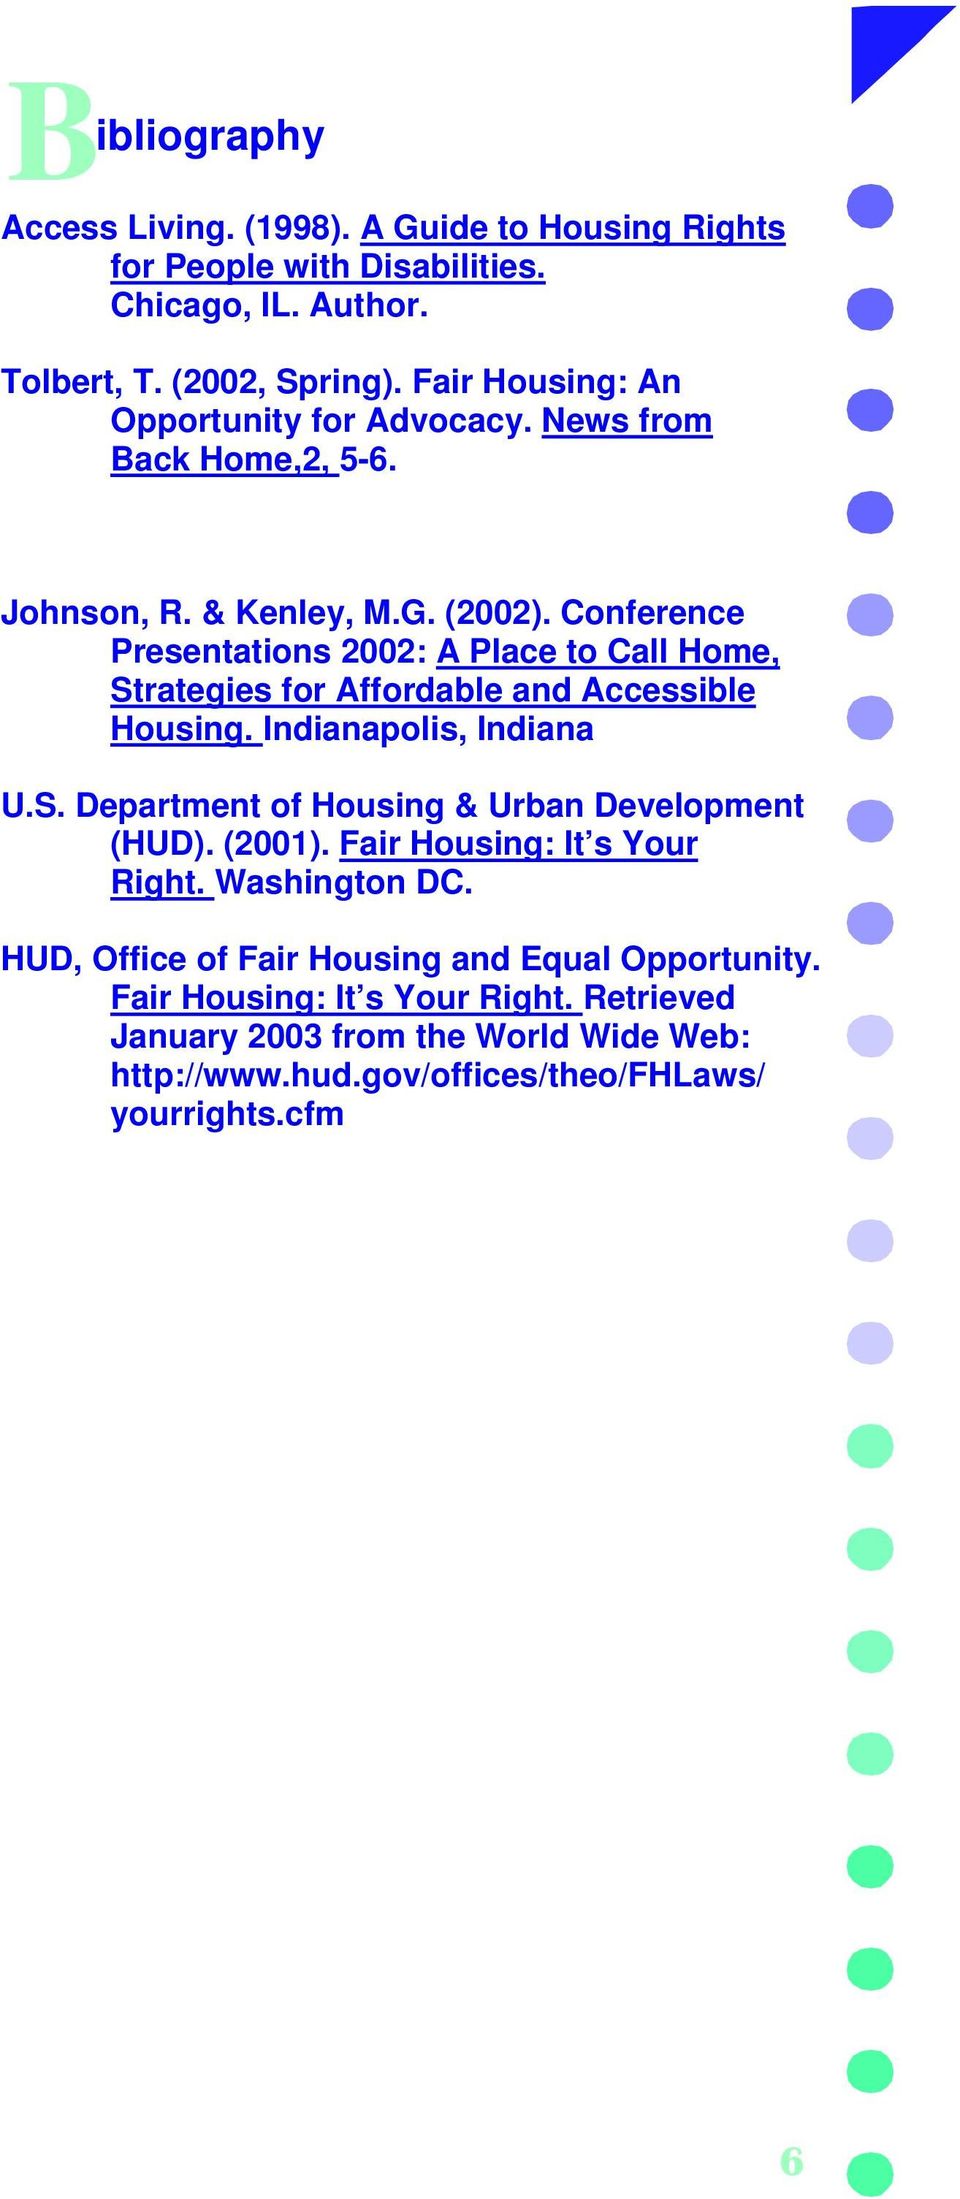 Conference Presentations 2002: A Place to Call Home, Strategies for Affordable and Accessible Housing. Indianapolis, Indiana U.S. Department of Housing & Urban Development (HUD).